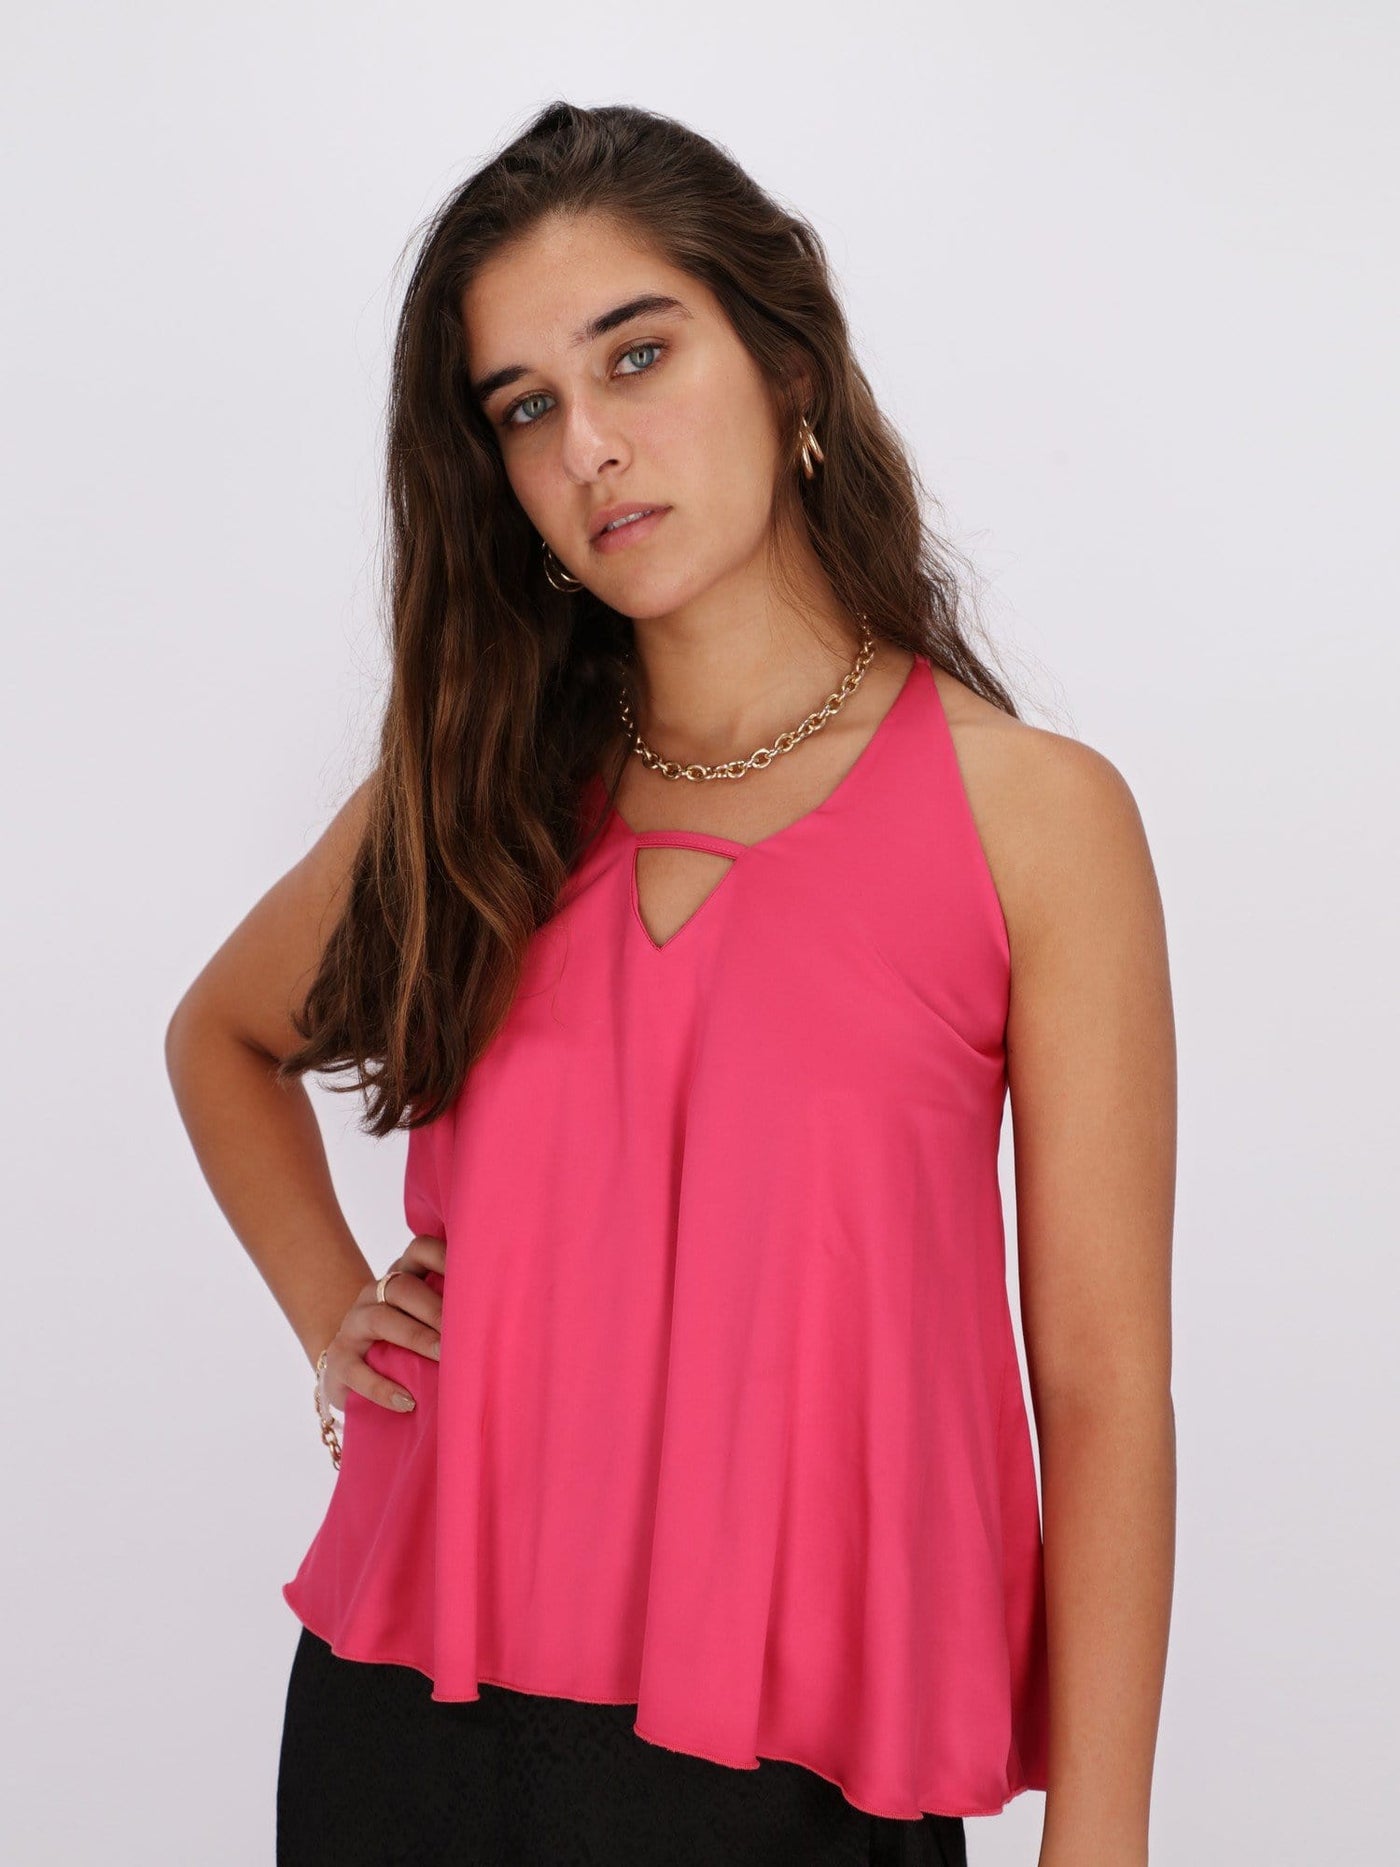 OR Tops & Blouses Fandango Pink / L Cross Back Top with Halter Neck